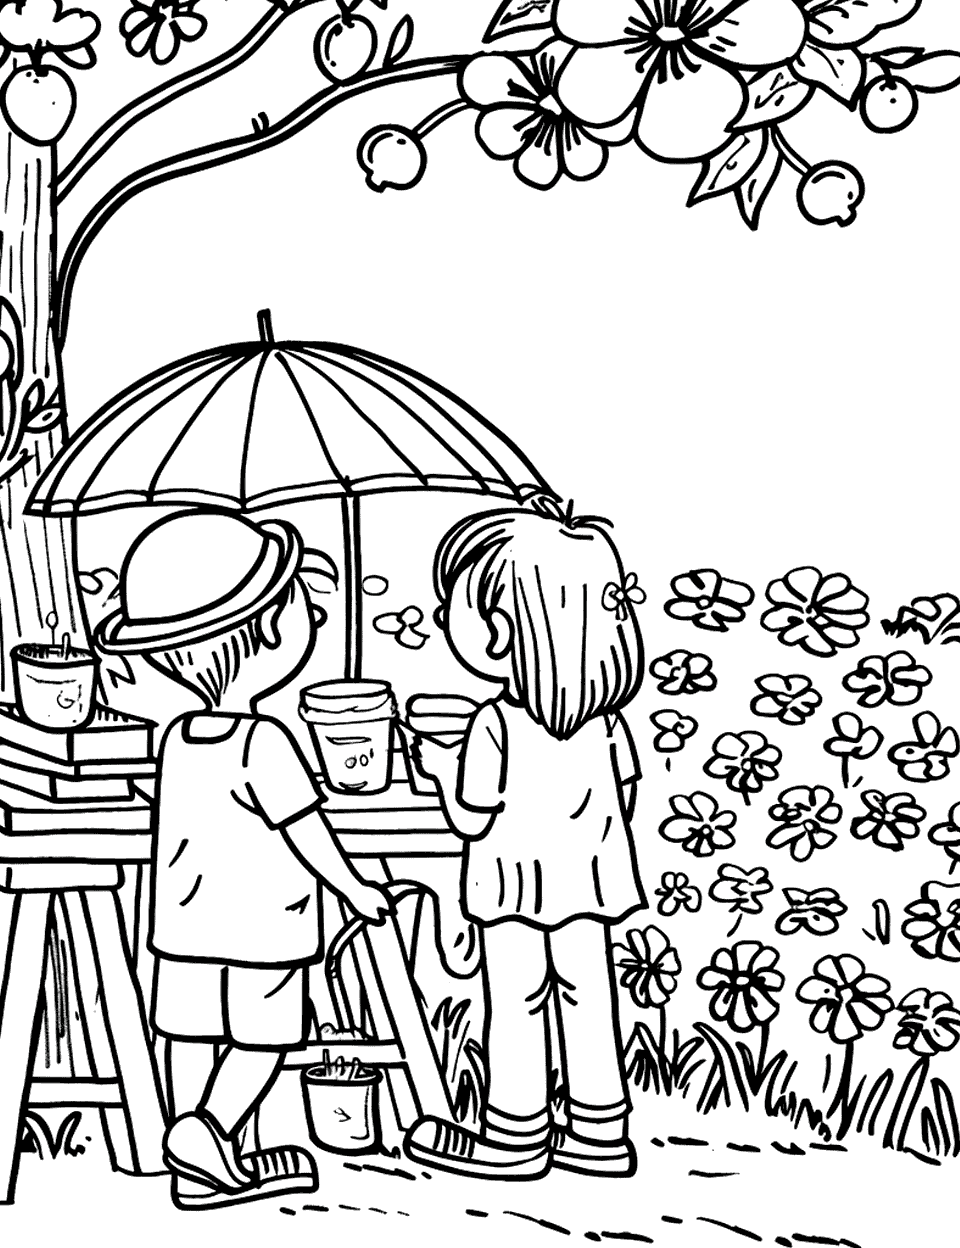 Summer Lemonade Stand Garden Coloring Page - Two kids running a lemonade stand in their front yard with a garden backdrop.